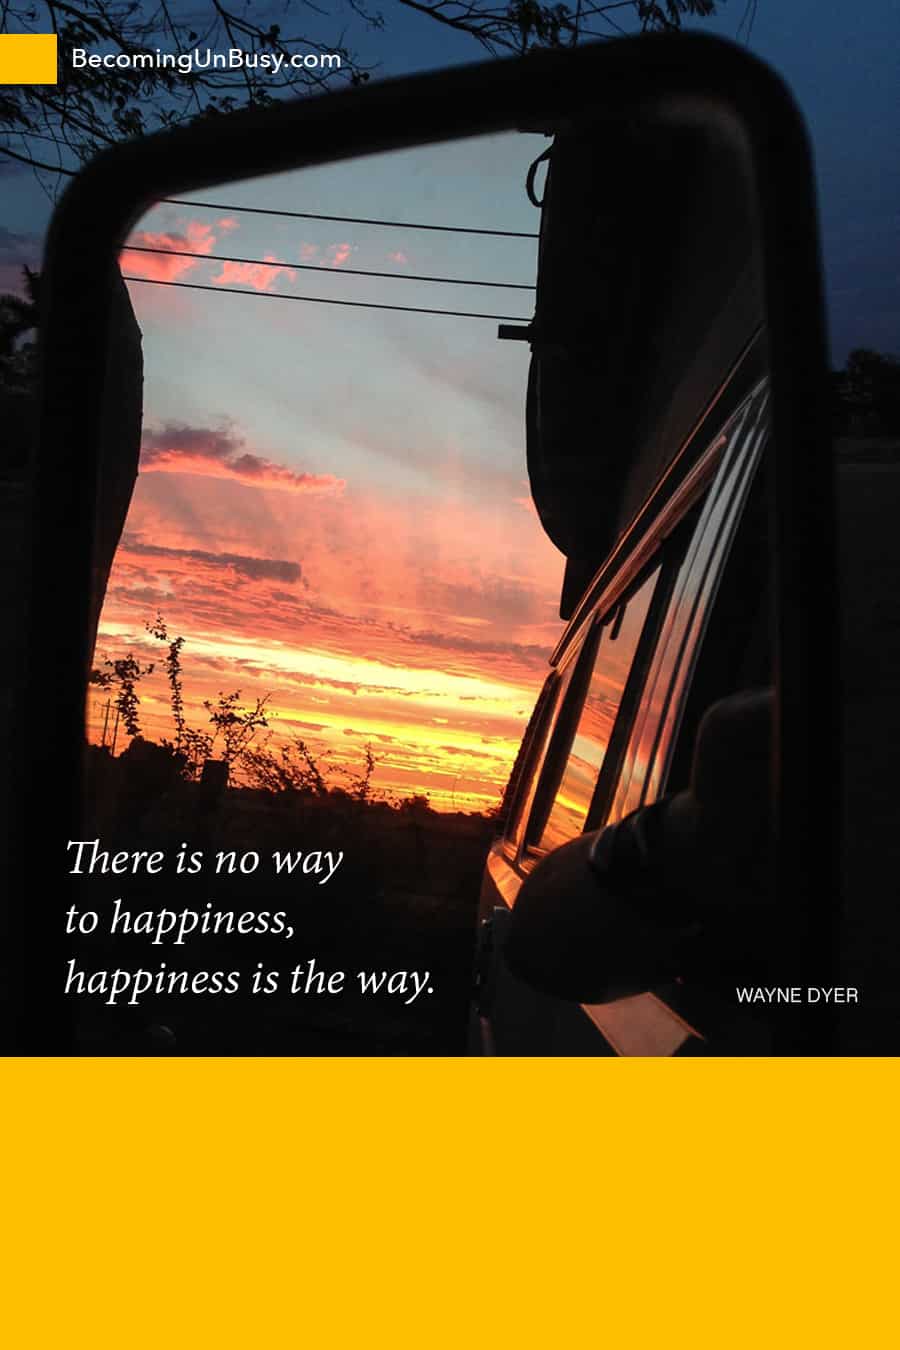 There is no way to happiness, happiness is the way. — Wayne Dyer *loved this quote and post about a family who travels together for an entire year. fascinating takeaways.